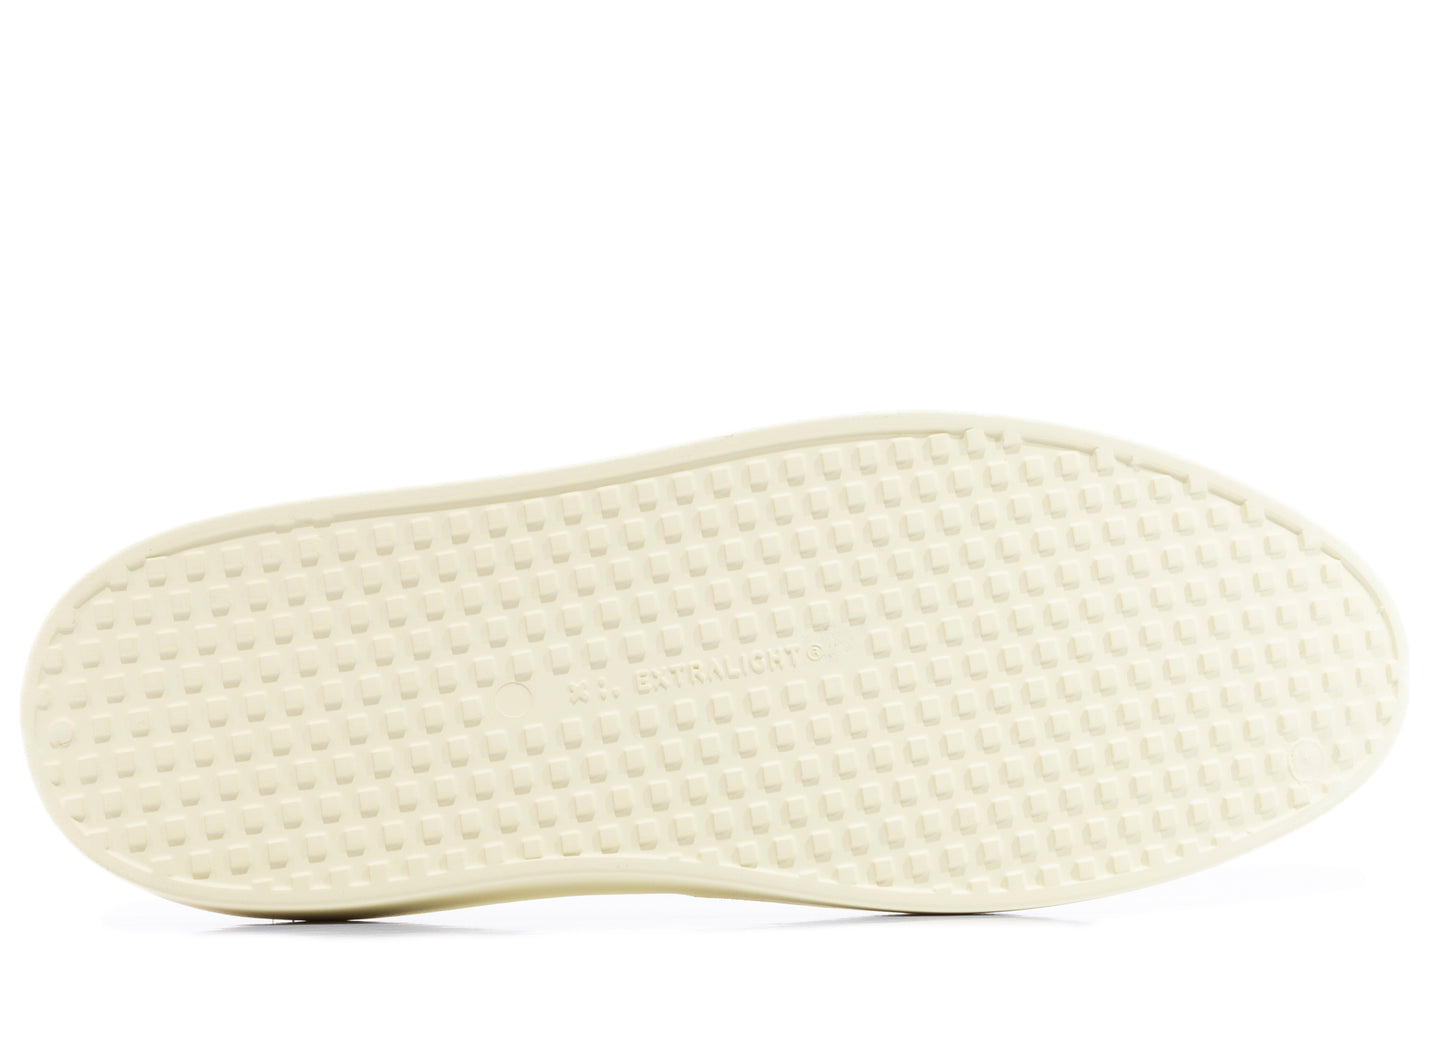 Fear of God The California Slip-On in Canary